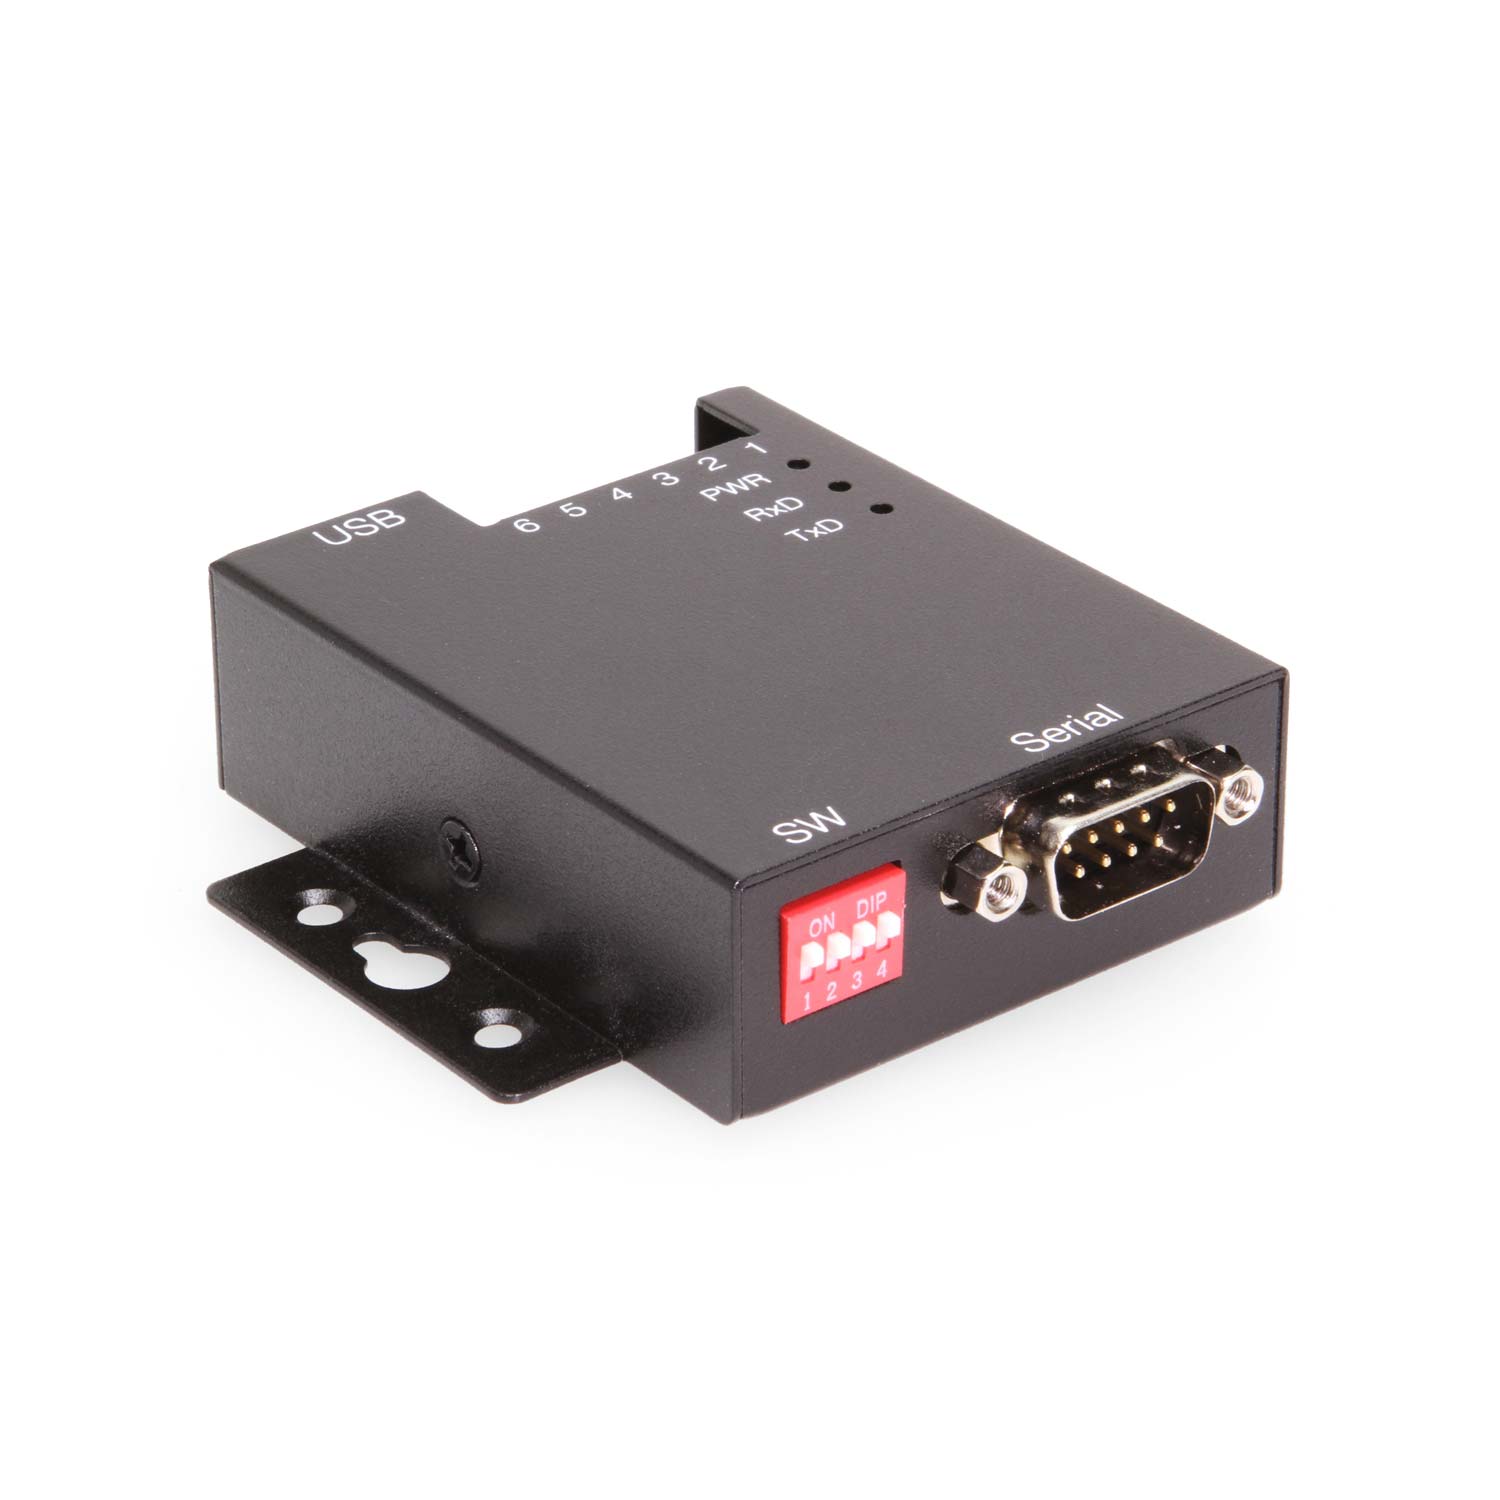 1-Port USB to RS-232 Selectable RS-422 or RS-485 Industrial Adapter